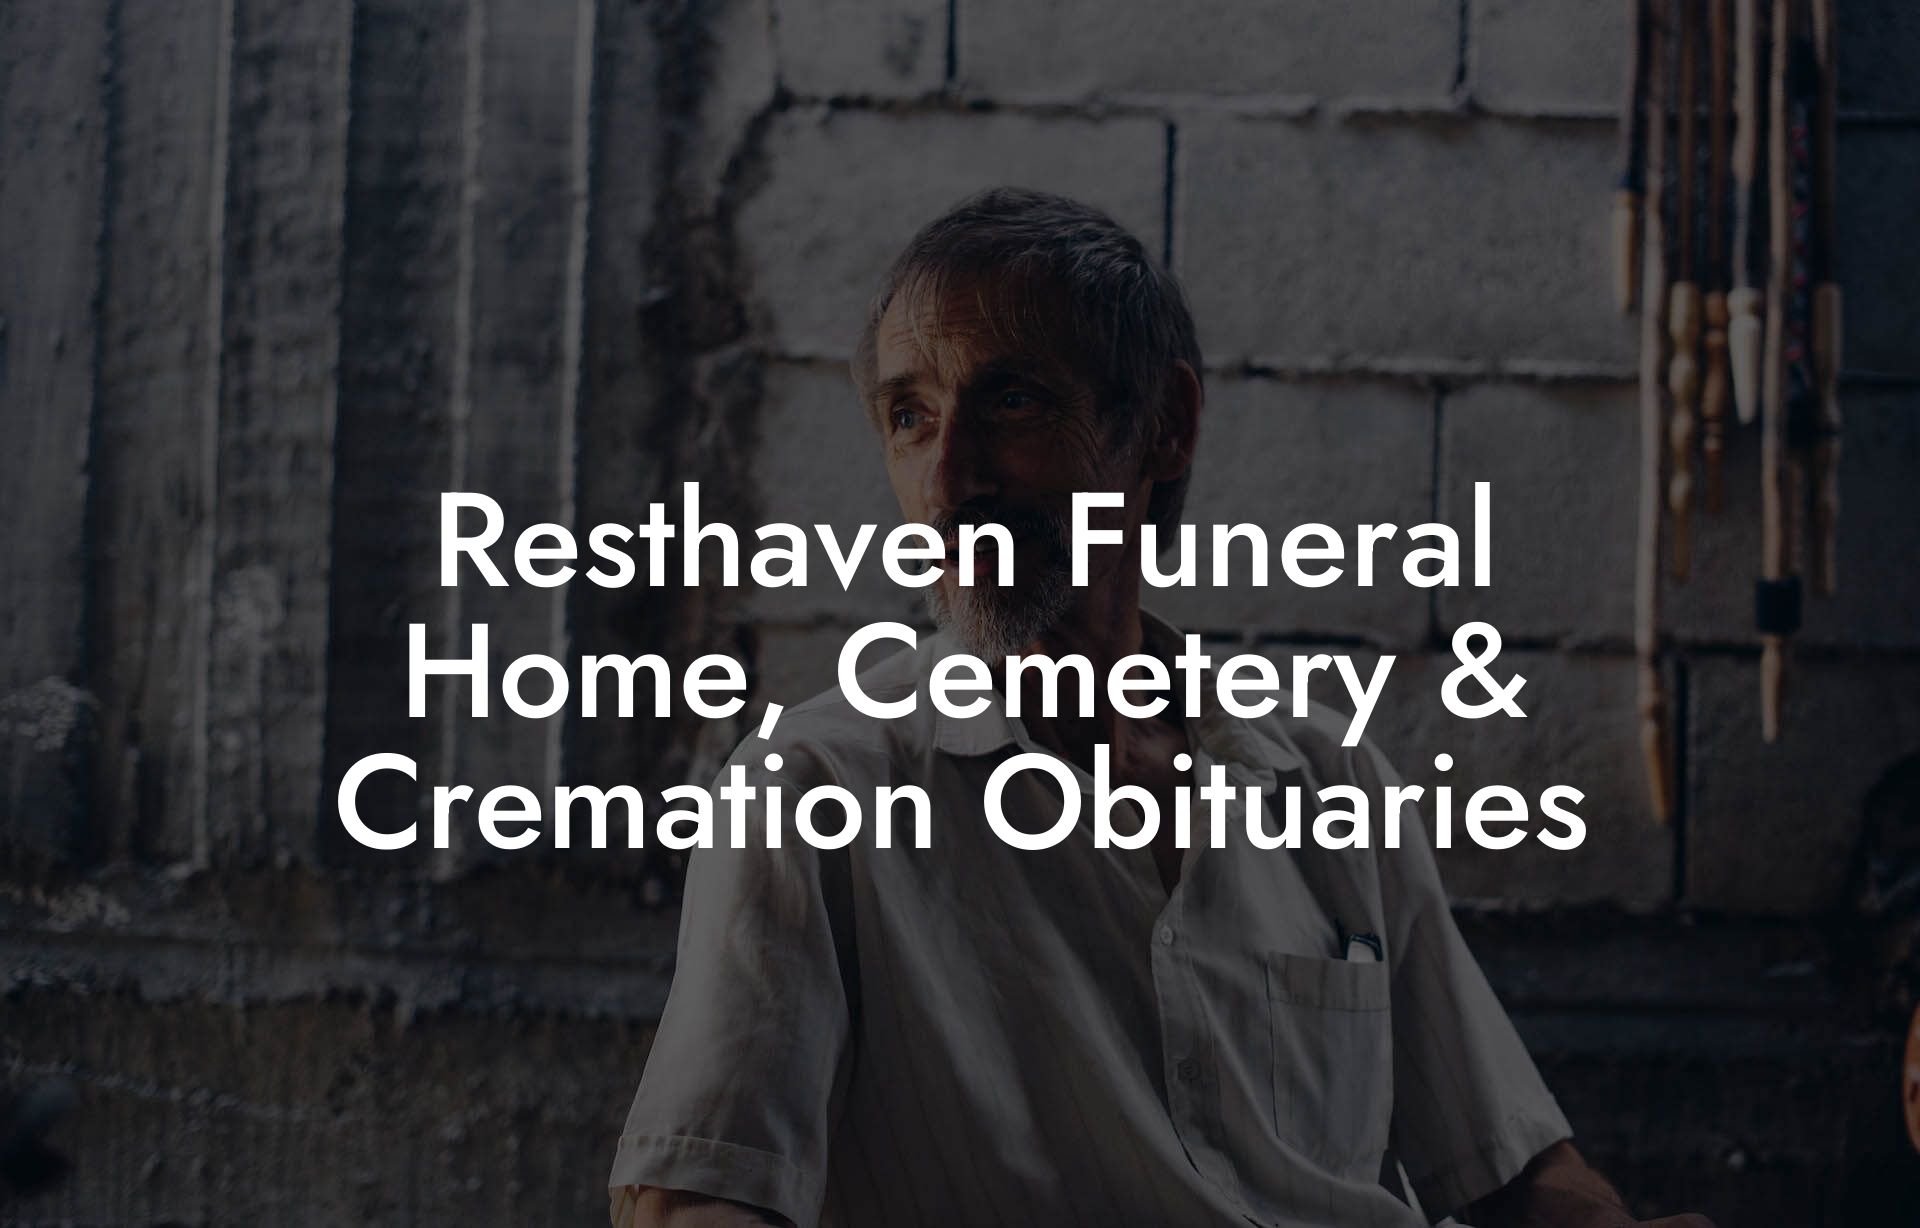 Resthaven Funeral Home, Cemetery & Cremation Obituaries